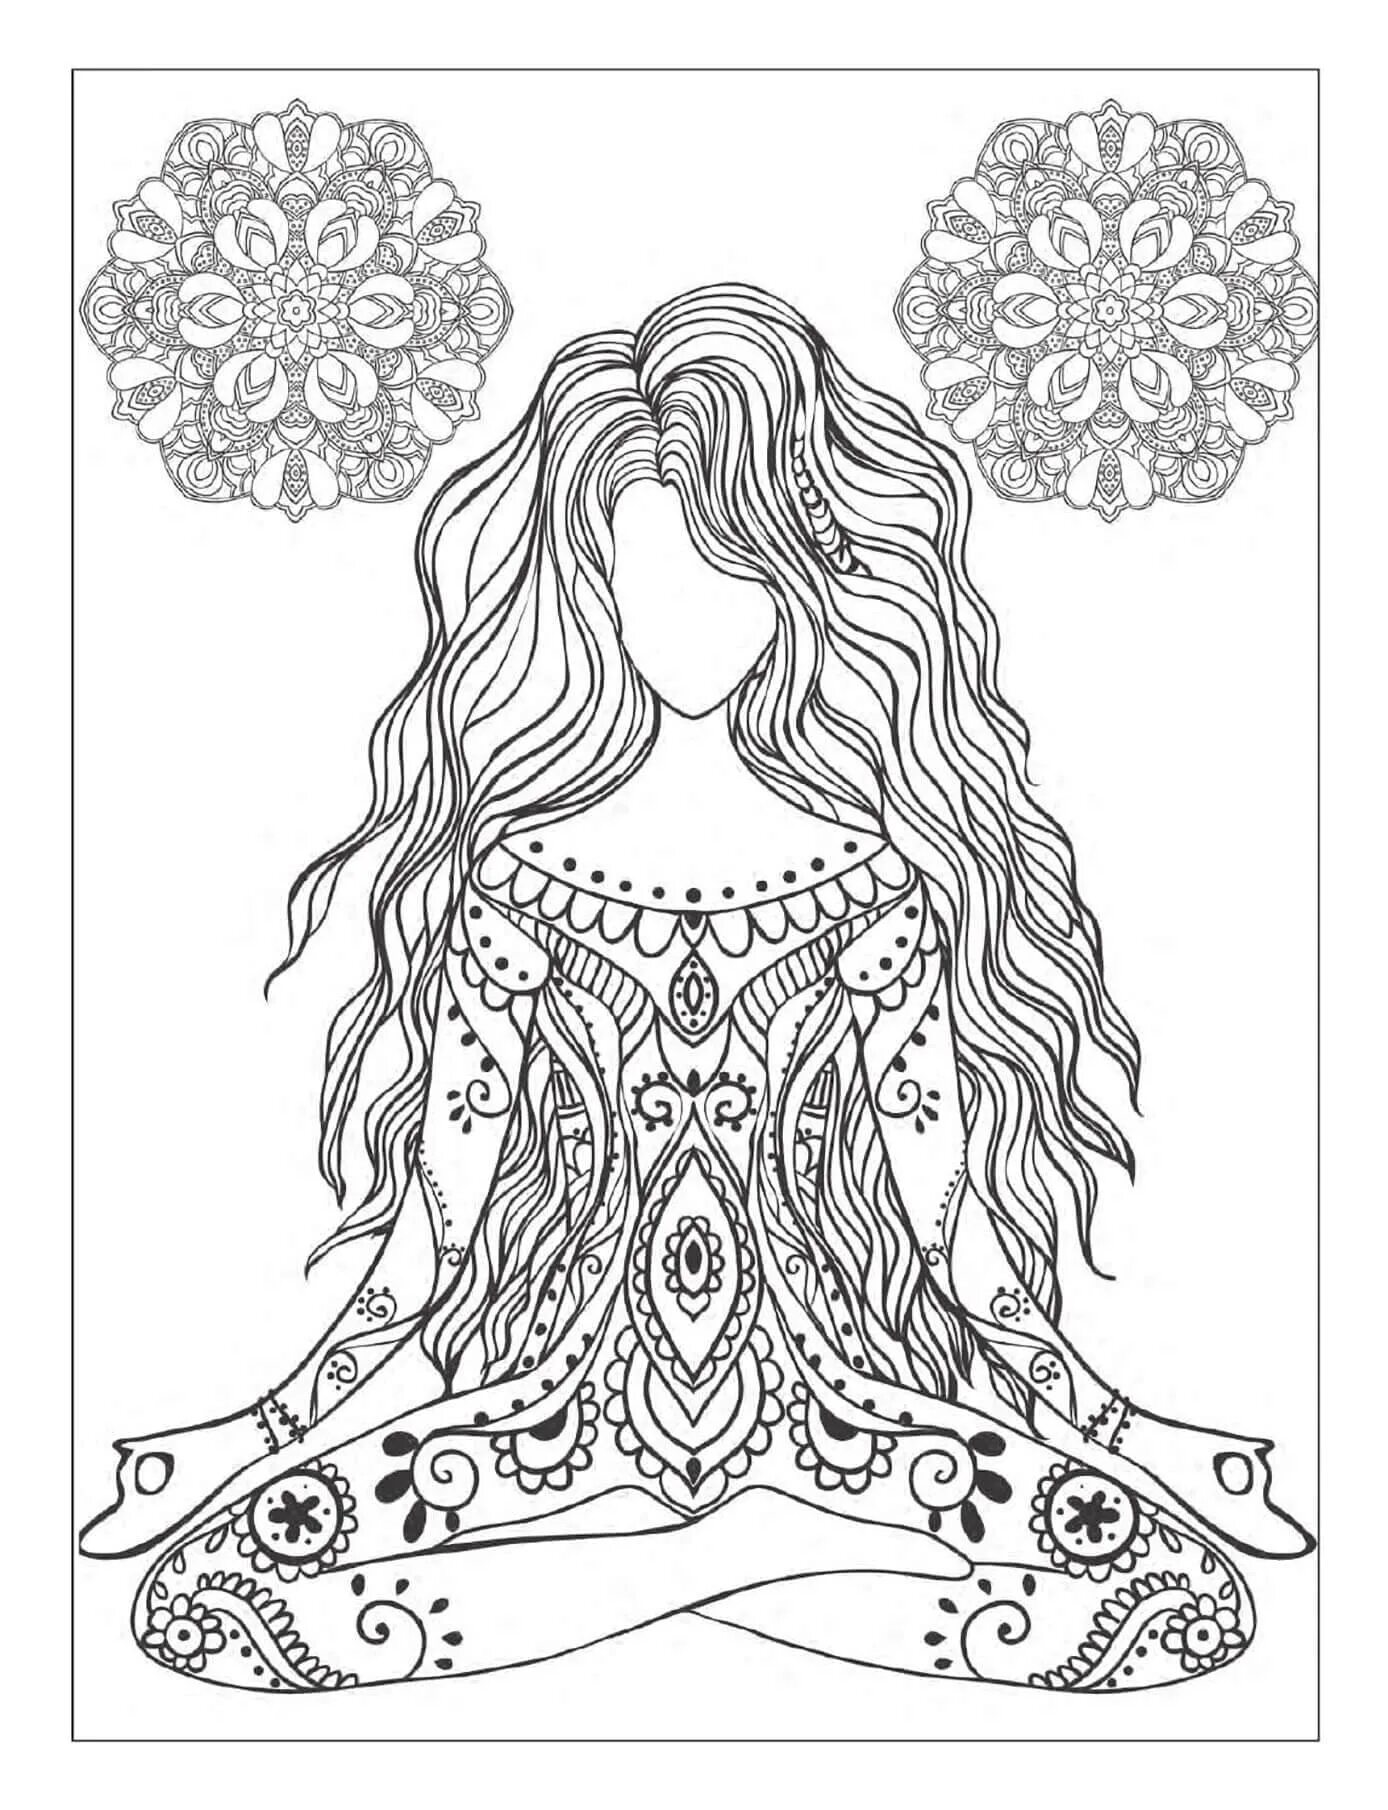 Touching meditative coloring book for adults